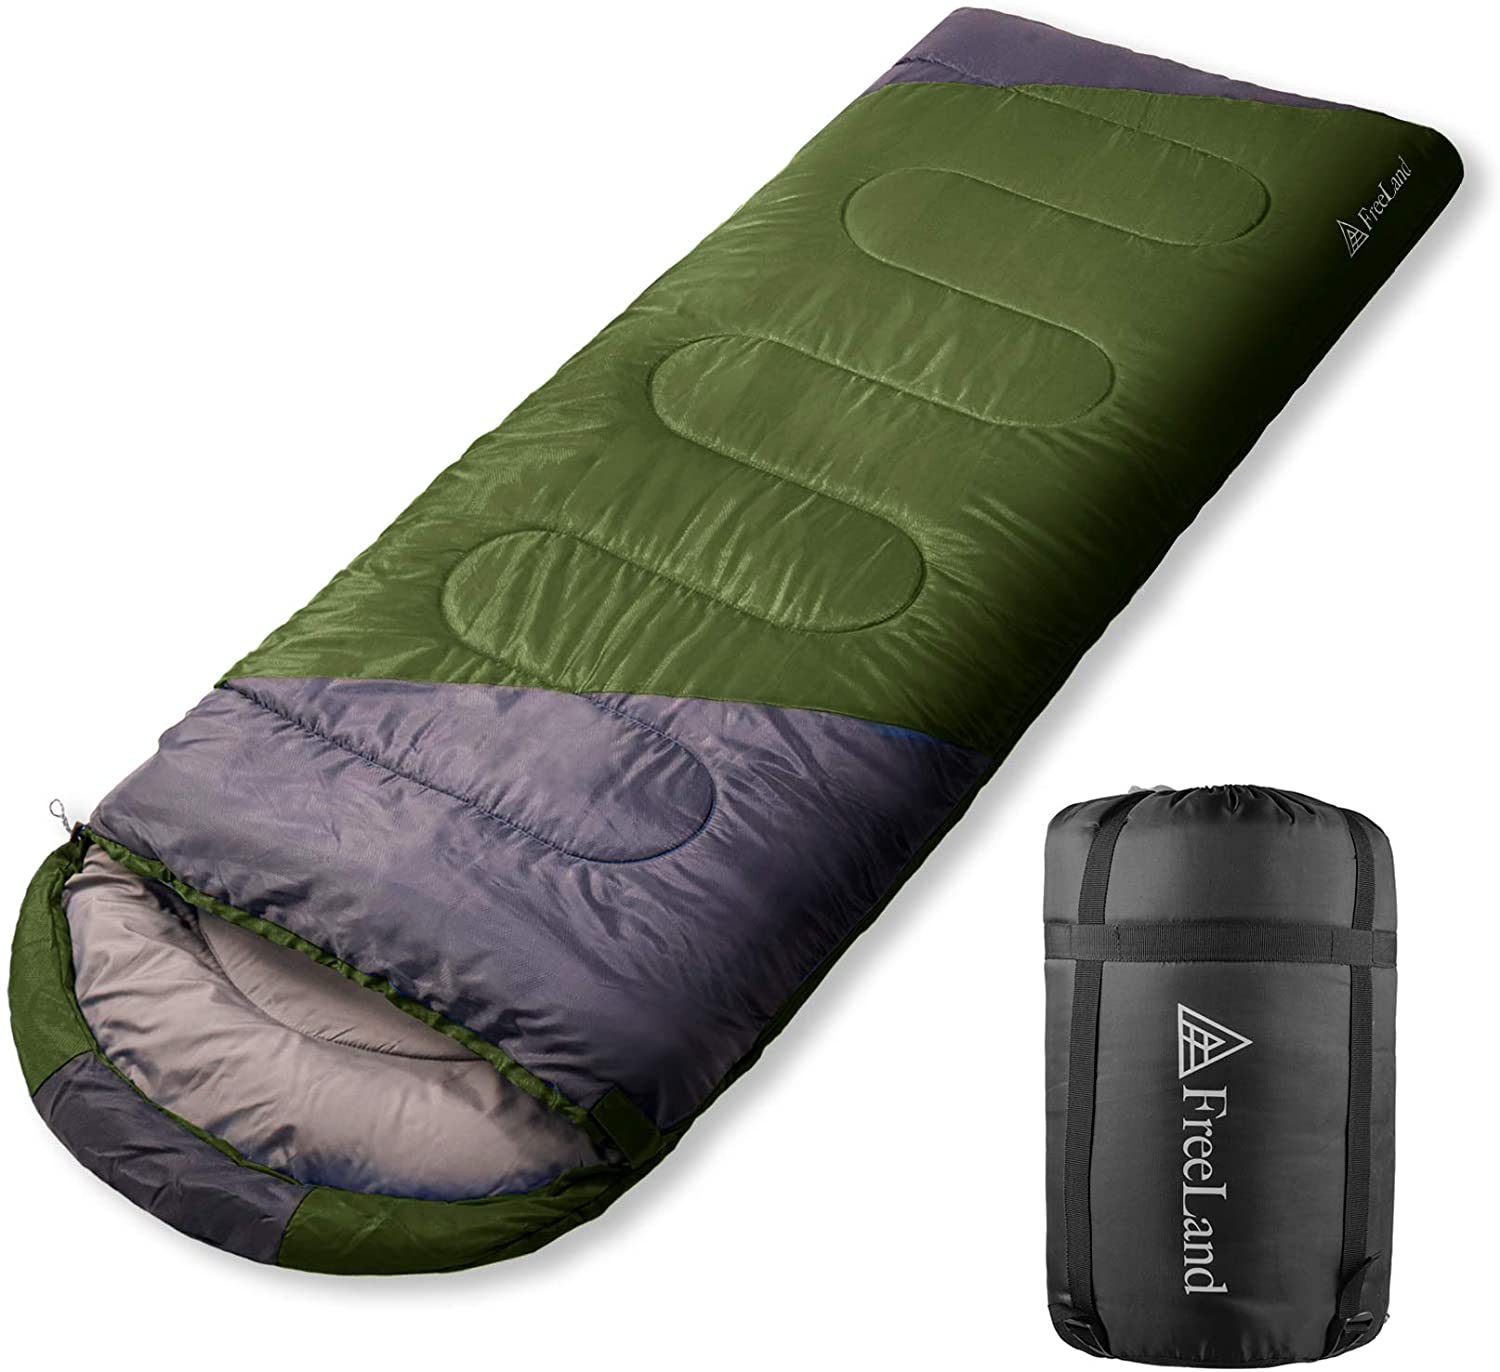 FreeLand Camping Sleeping Bags-3 Seasons Warm & Cold Weather, Lightweight Waterproof for Adults & Kids, Camping Gear Equipment for Traveling & Outdoors